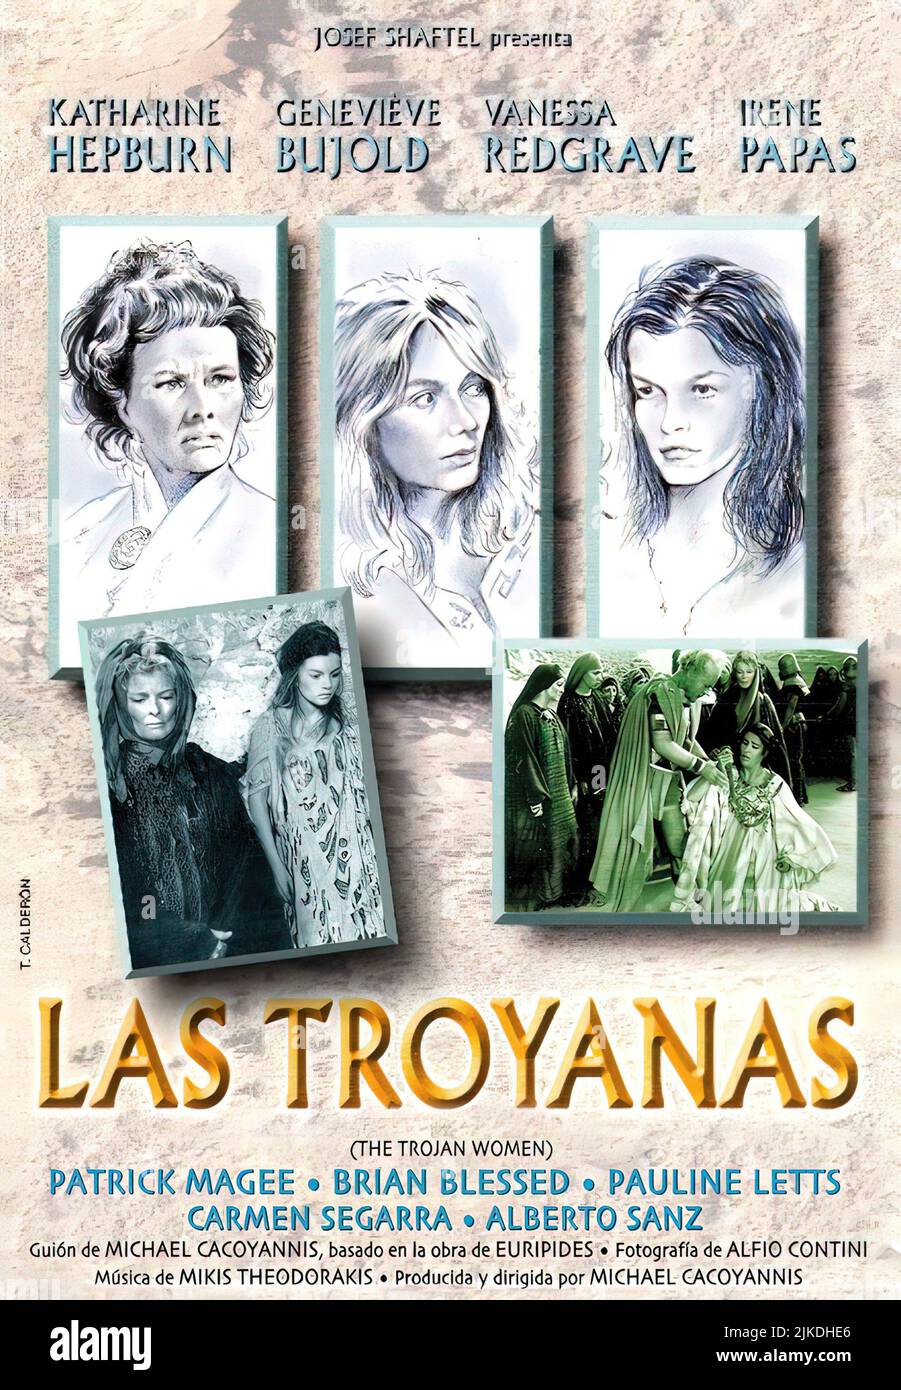 Based on one of Euripides' plays and starring a quartet of stars including Katharine Hepburn, Vanessa Redgrave, Geneviève Bujold and Irene Papas. The Stock Photo